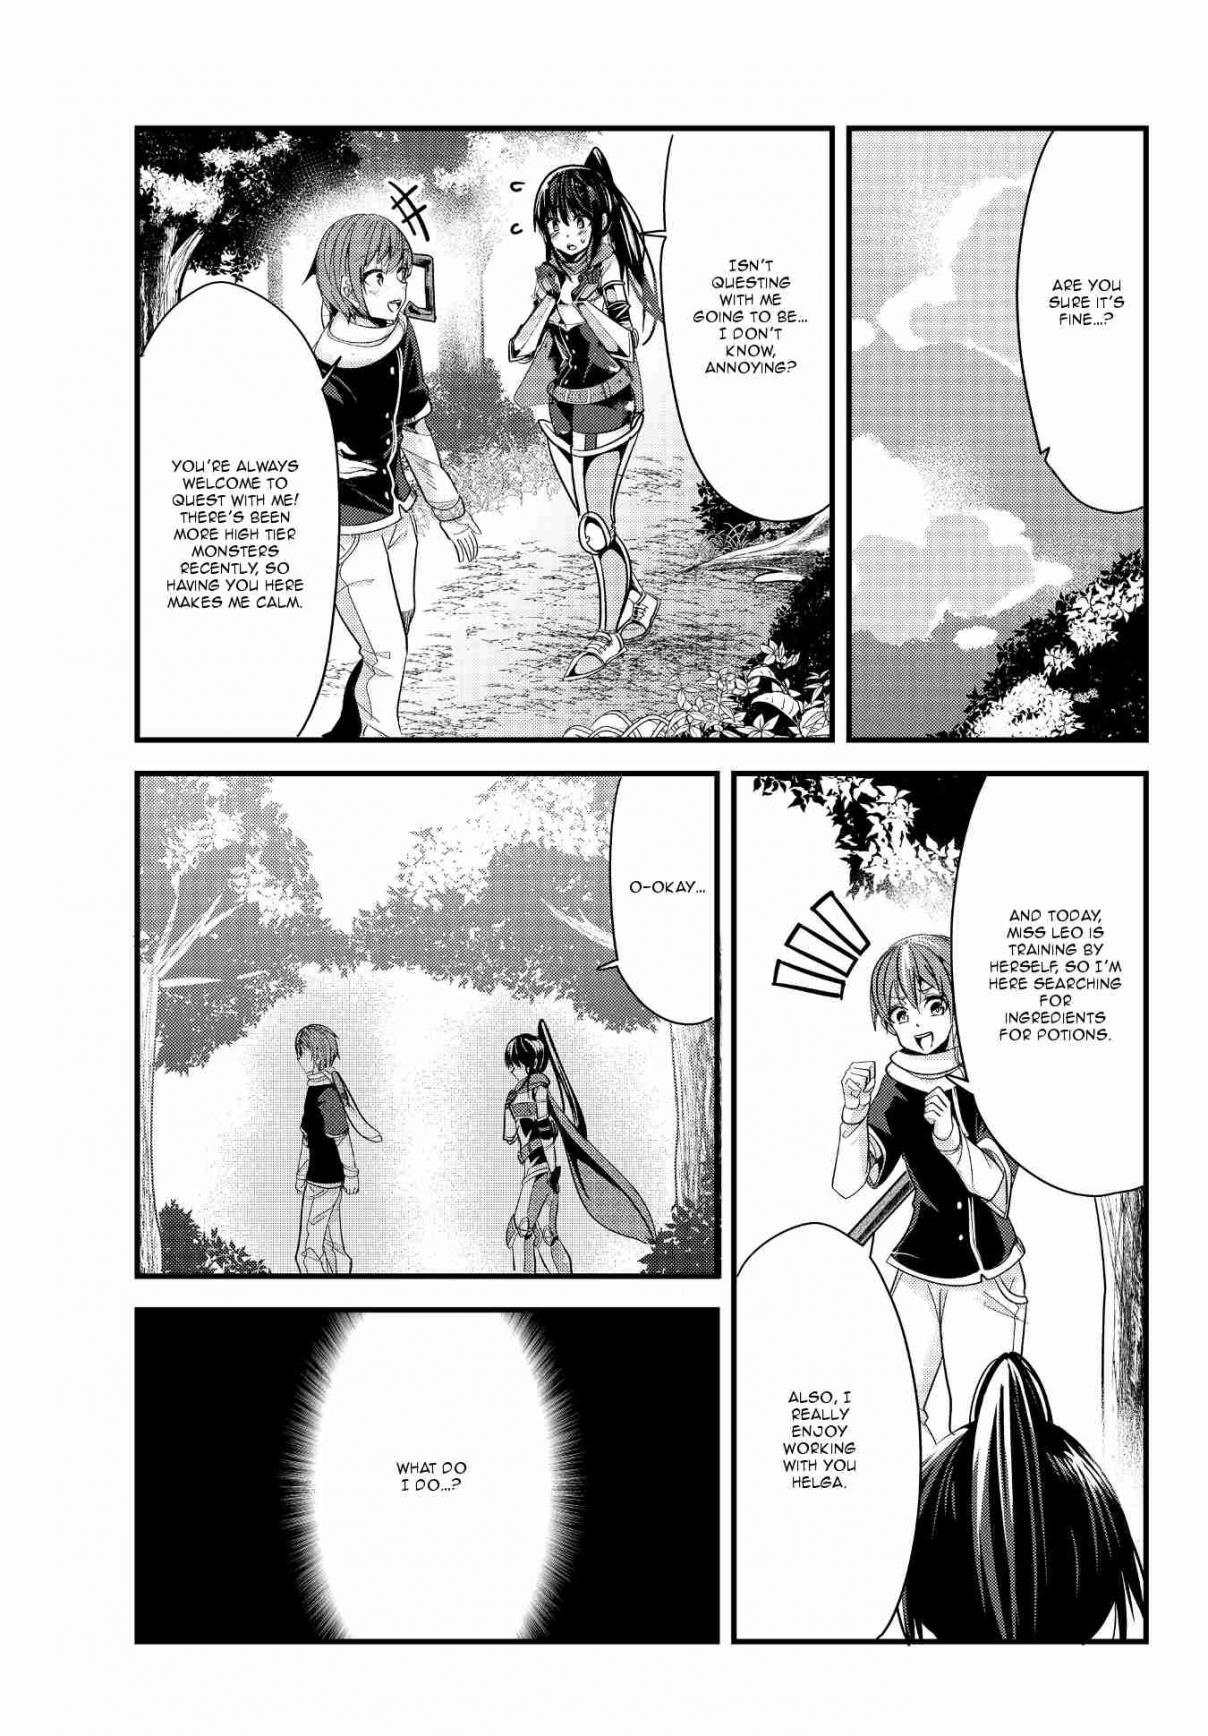 A Story About Treating a Female Knight, Who Has Never Been Treated as a Woman, as a Woman Ch. 66 The Berserk Blade and First Time Questing with Friends